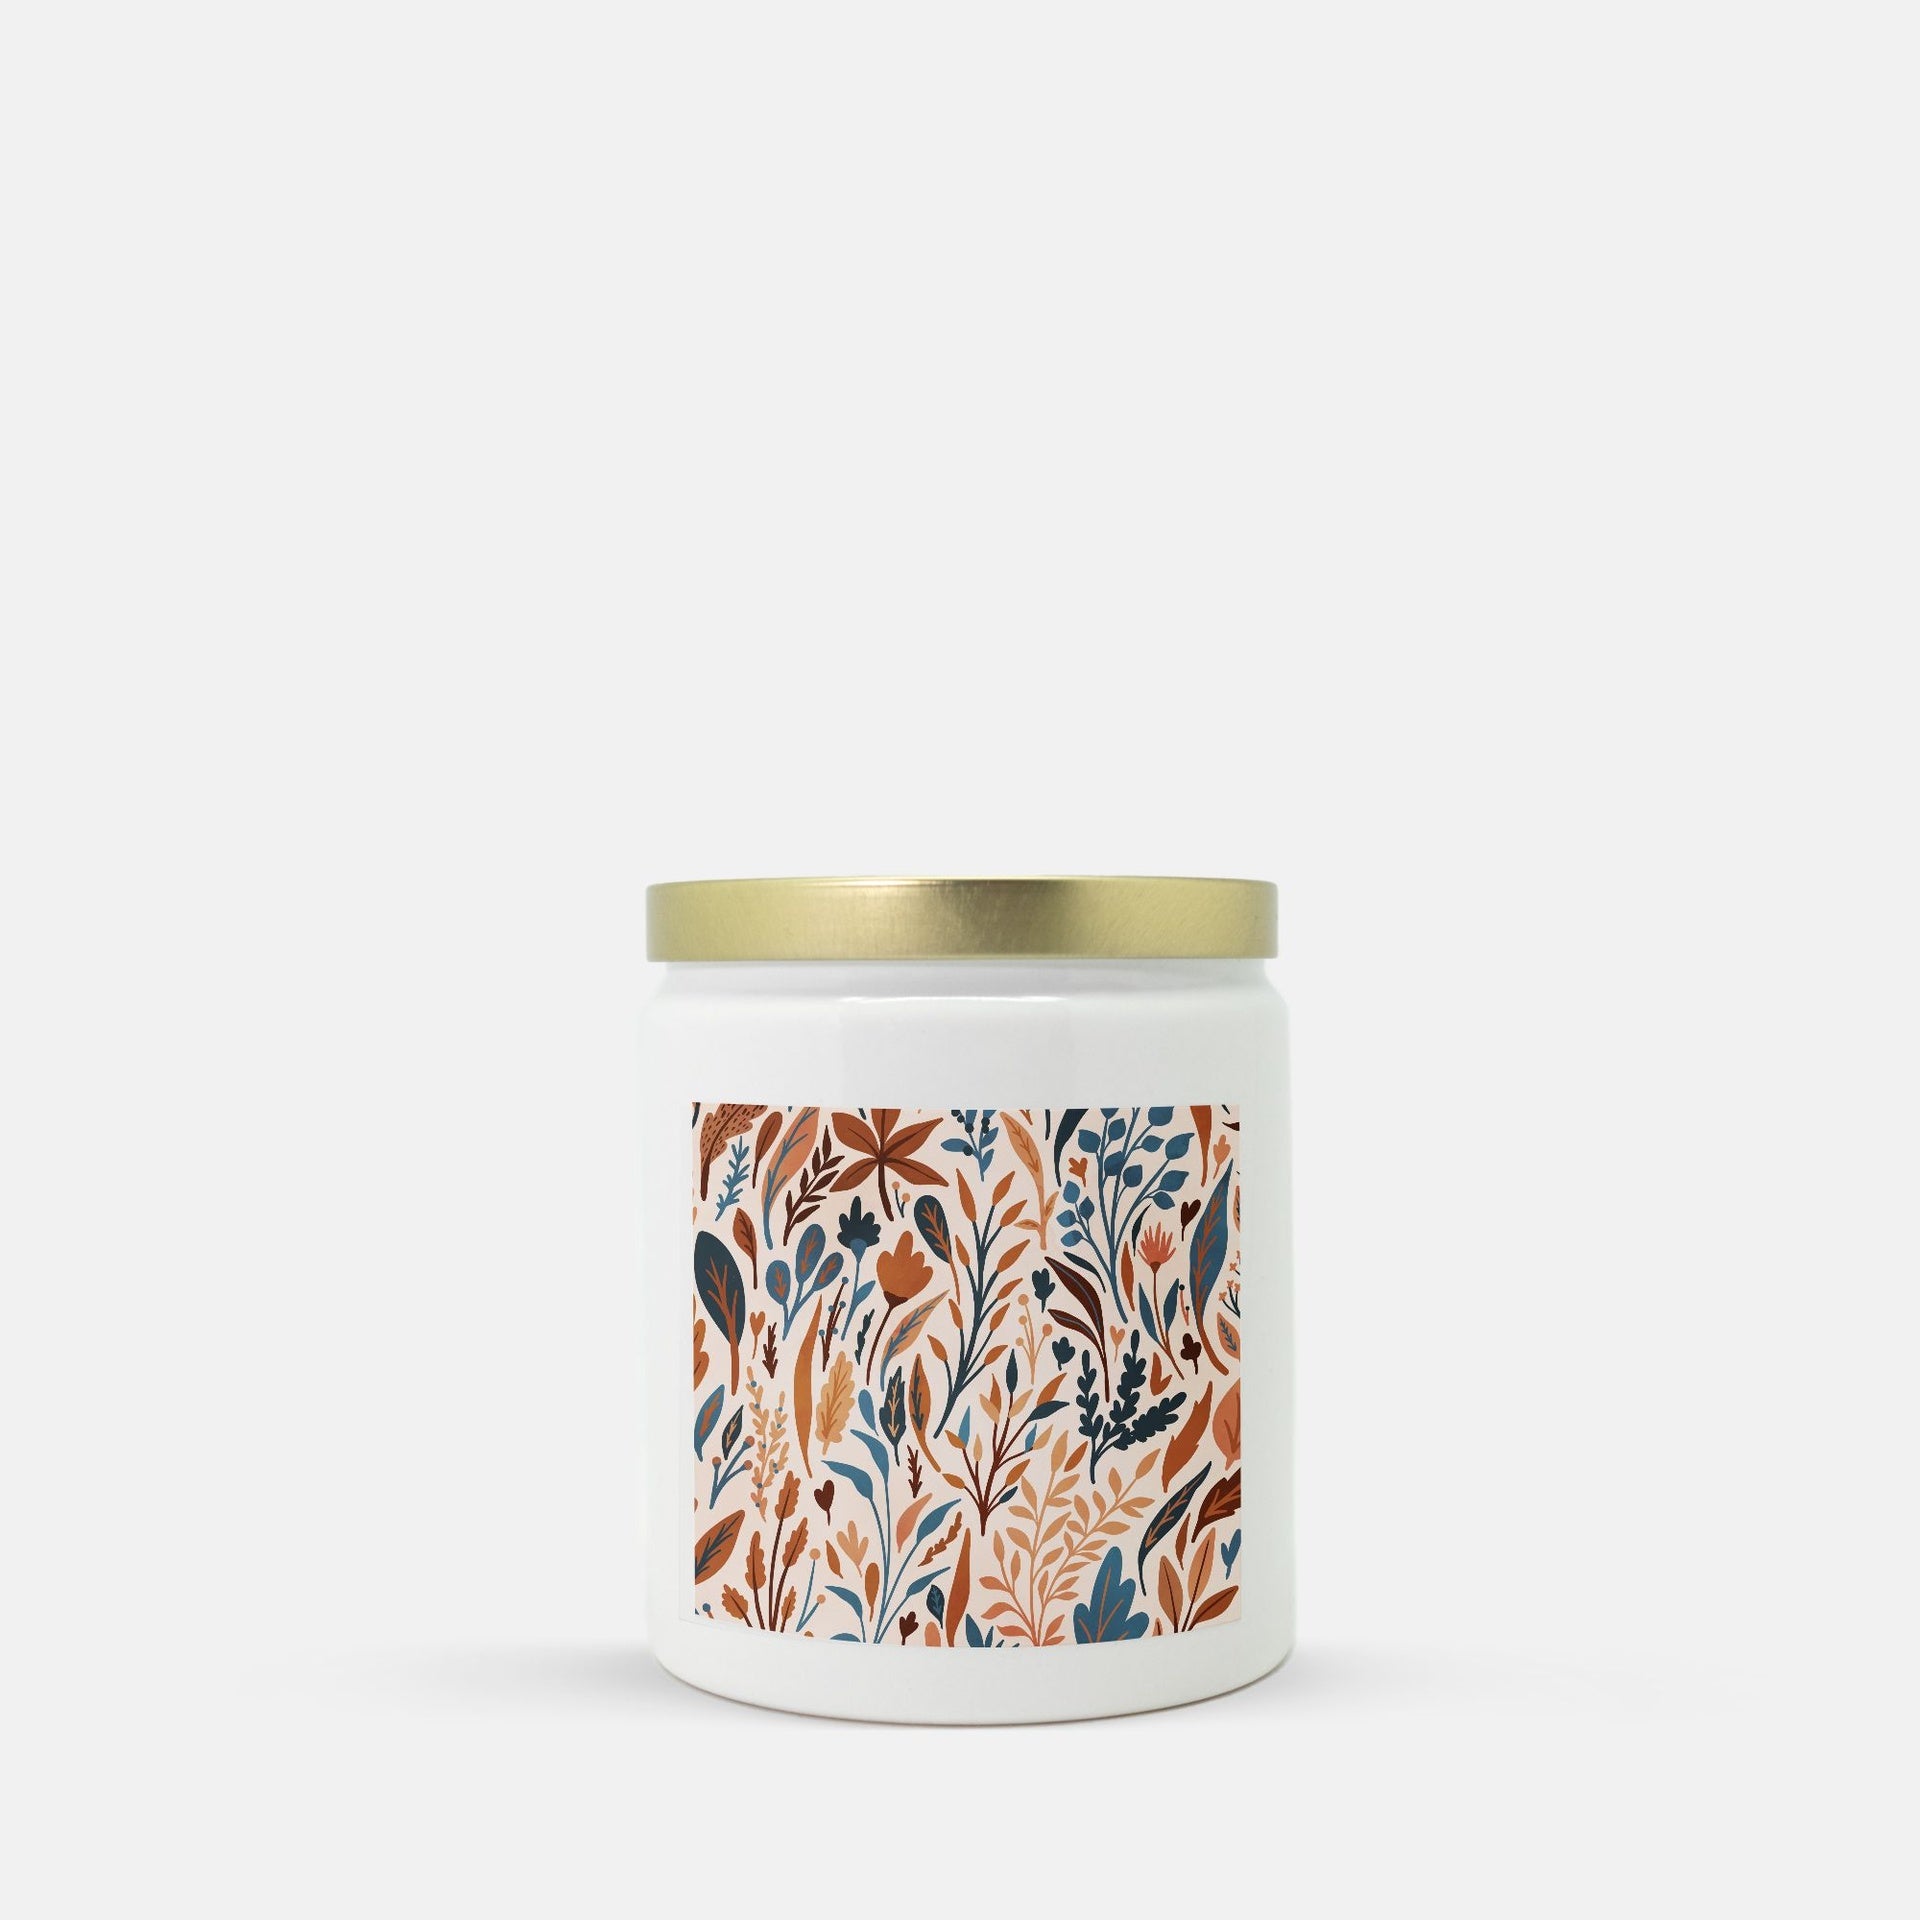 Lifestyle Details - Colorful Autumn Leaves Ceramic Candle w/ Gold Lid - Vanilla Bean